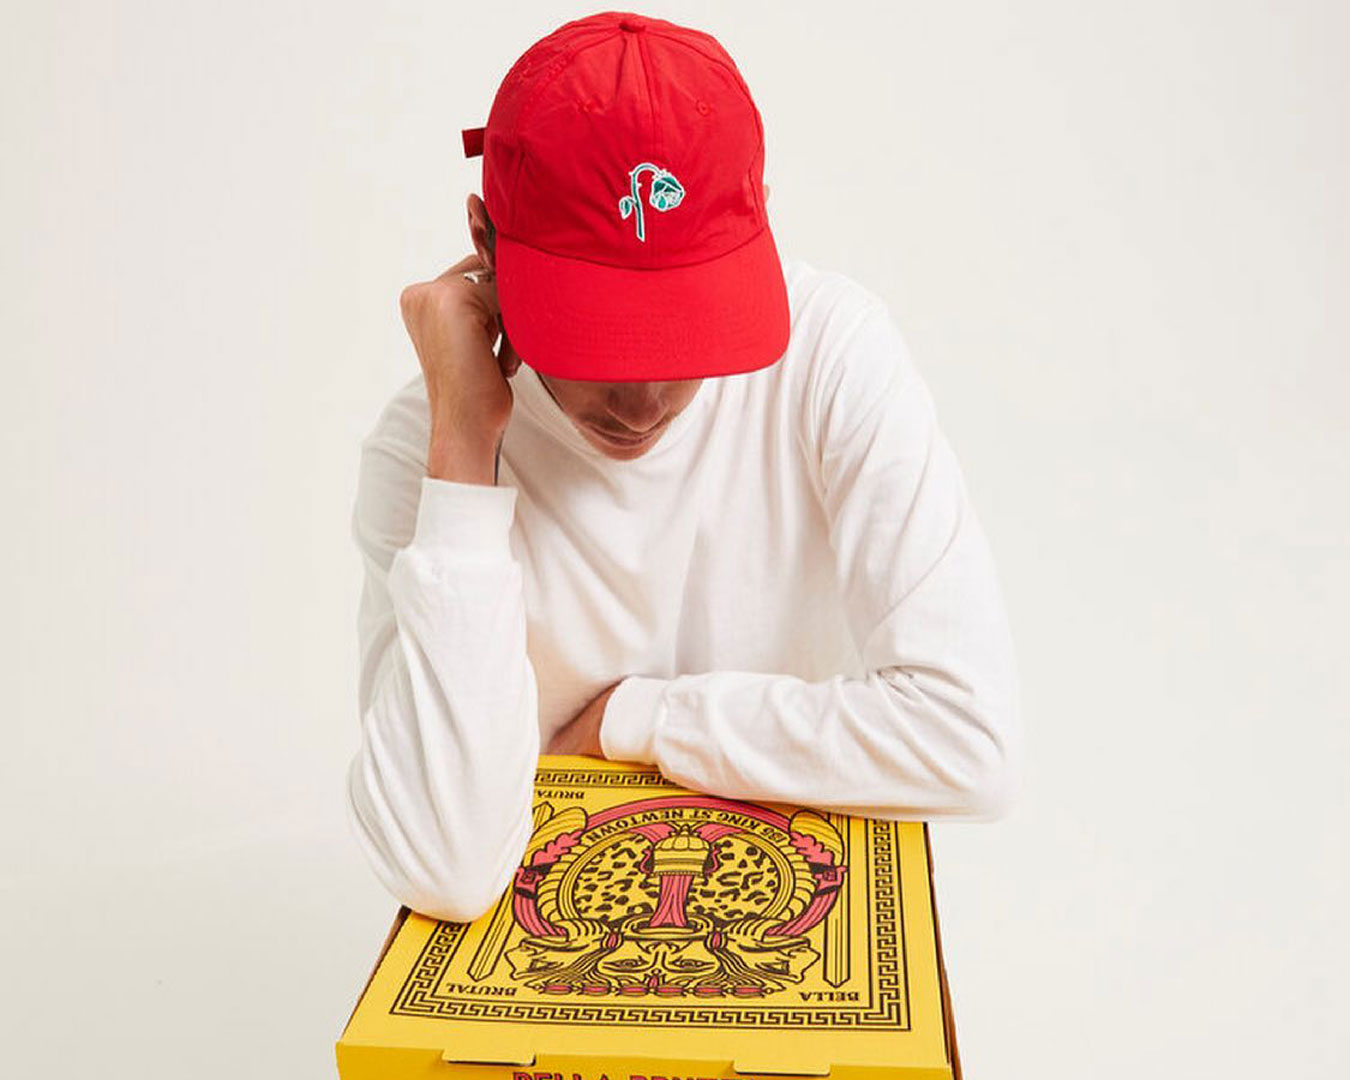 Person in red cap with pizza boxes